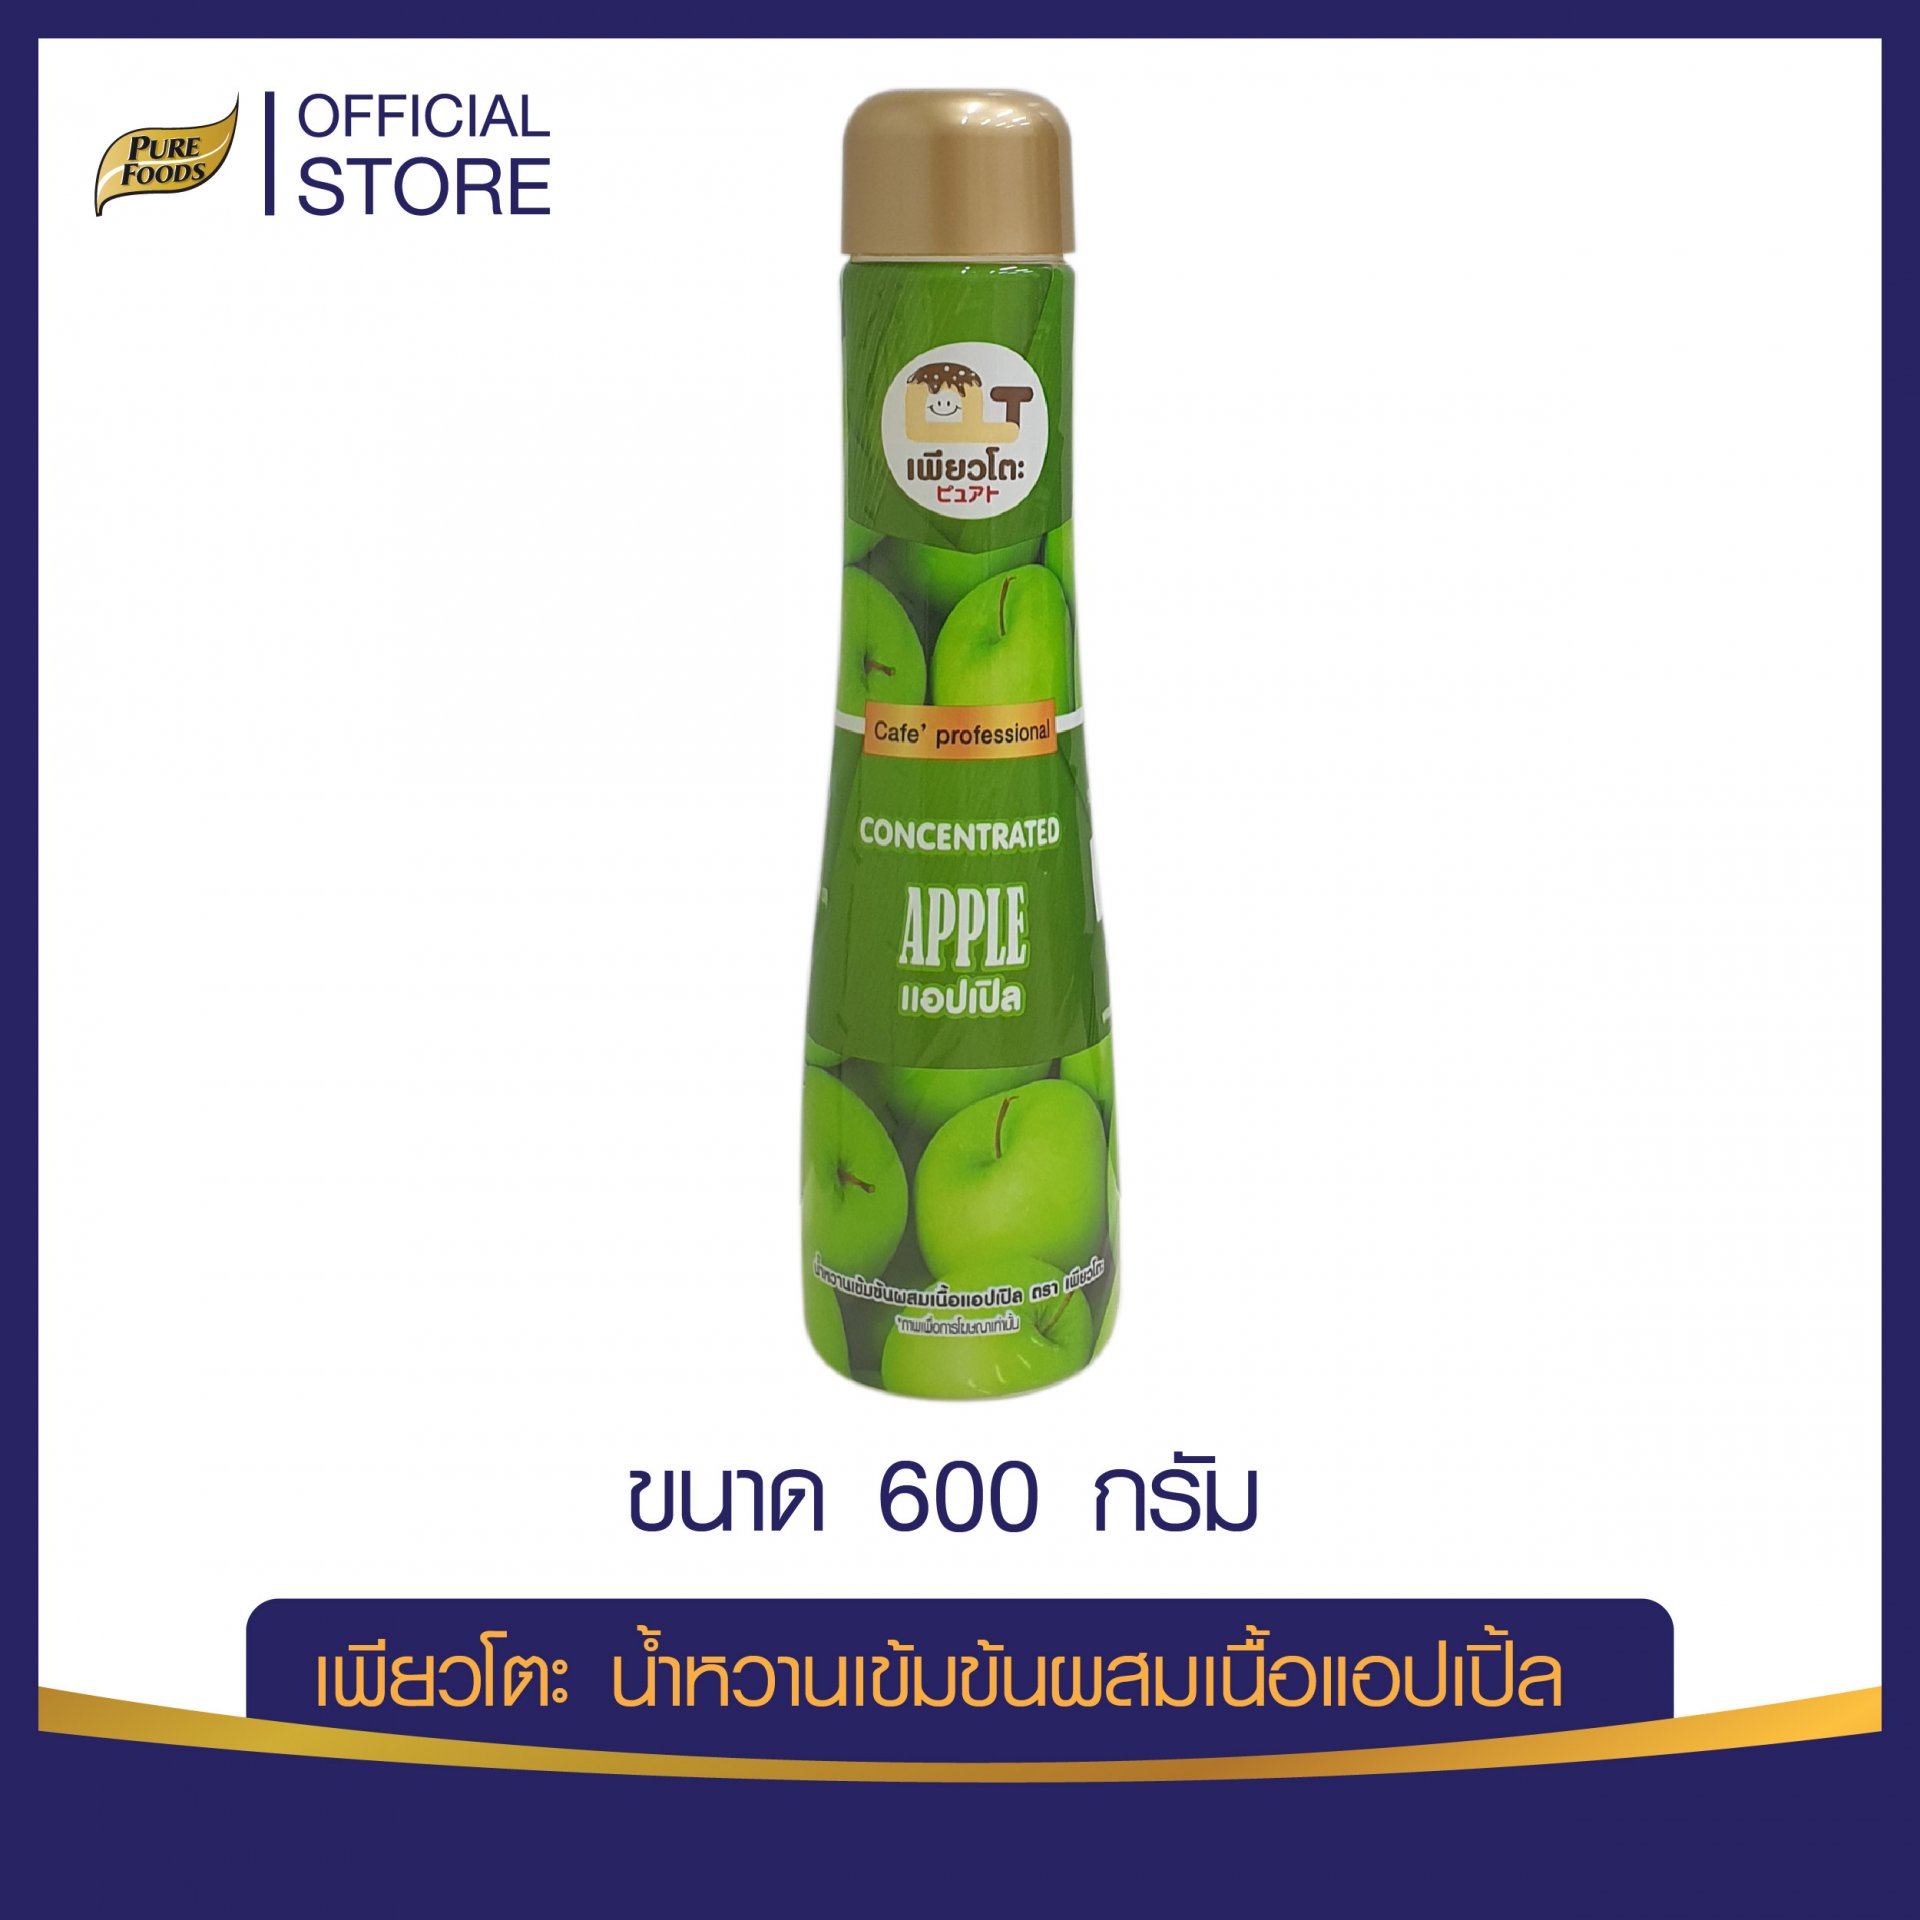 Concentrated syrup, apple flavor, Pureto brand, size 600g.